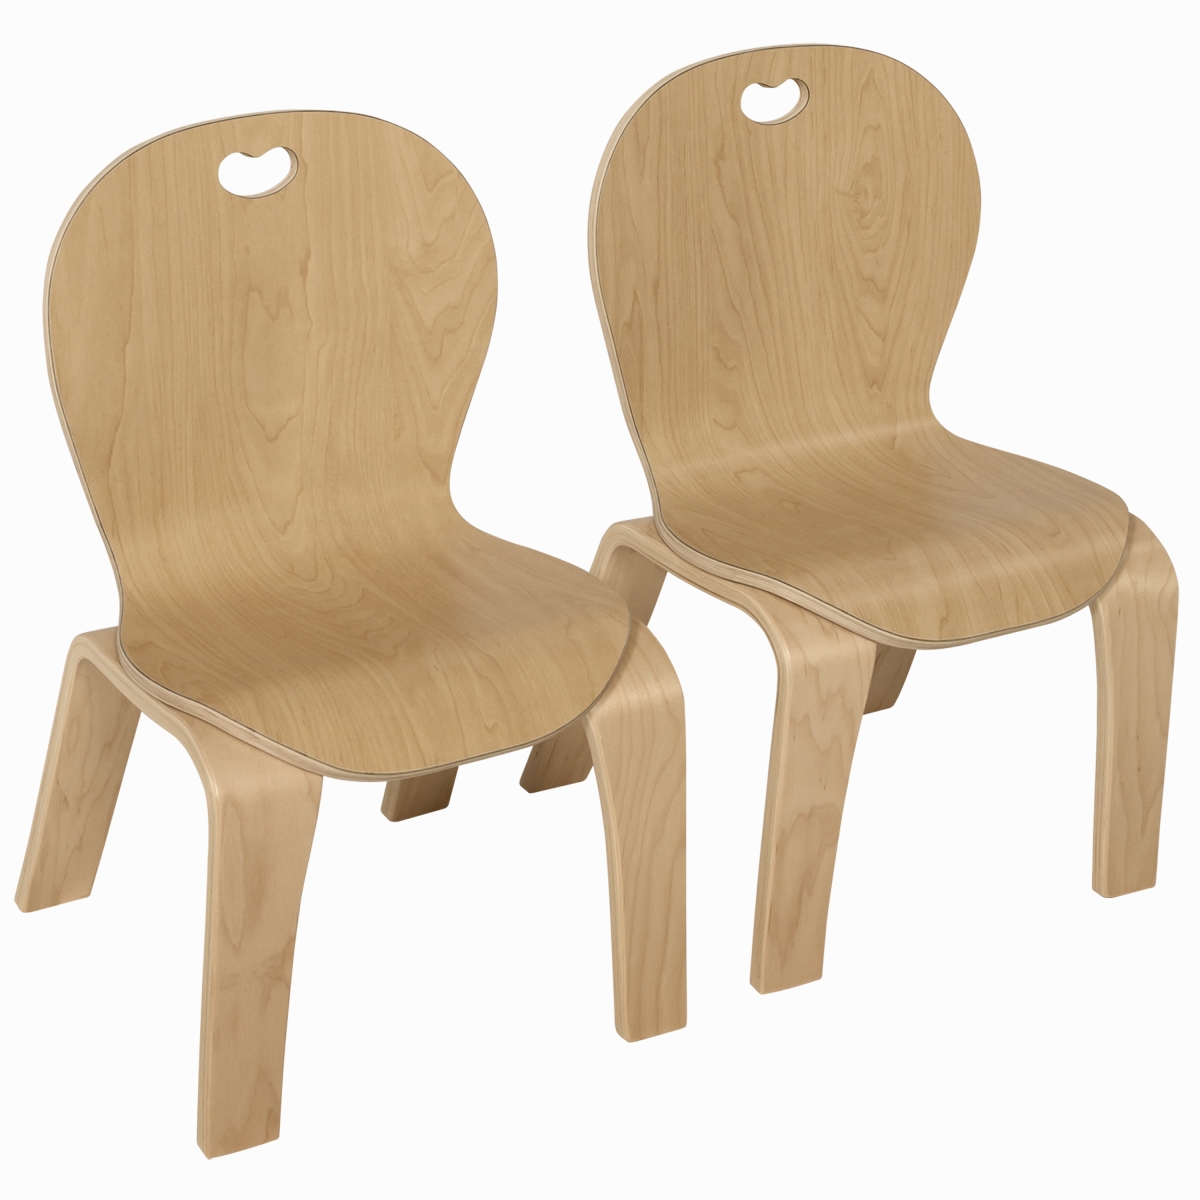 Mh881002 10 In. Bentwood Kids Chair - Set Of 2